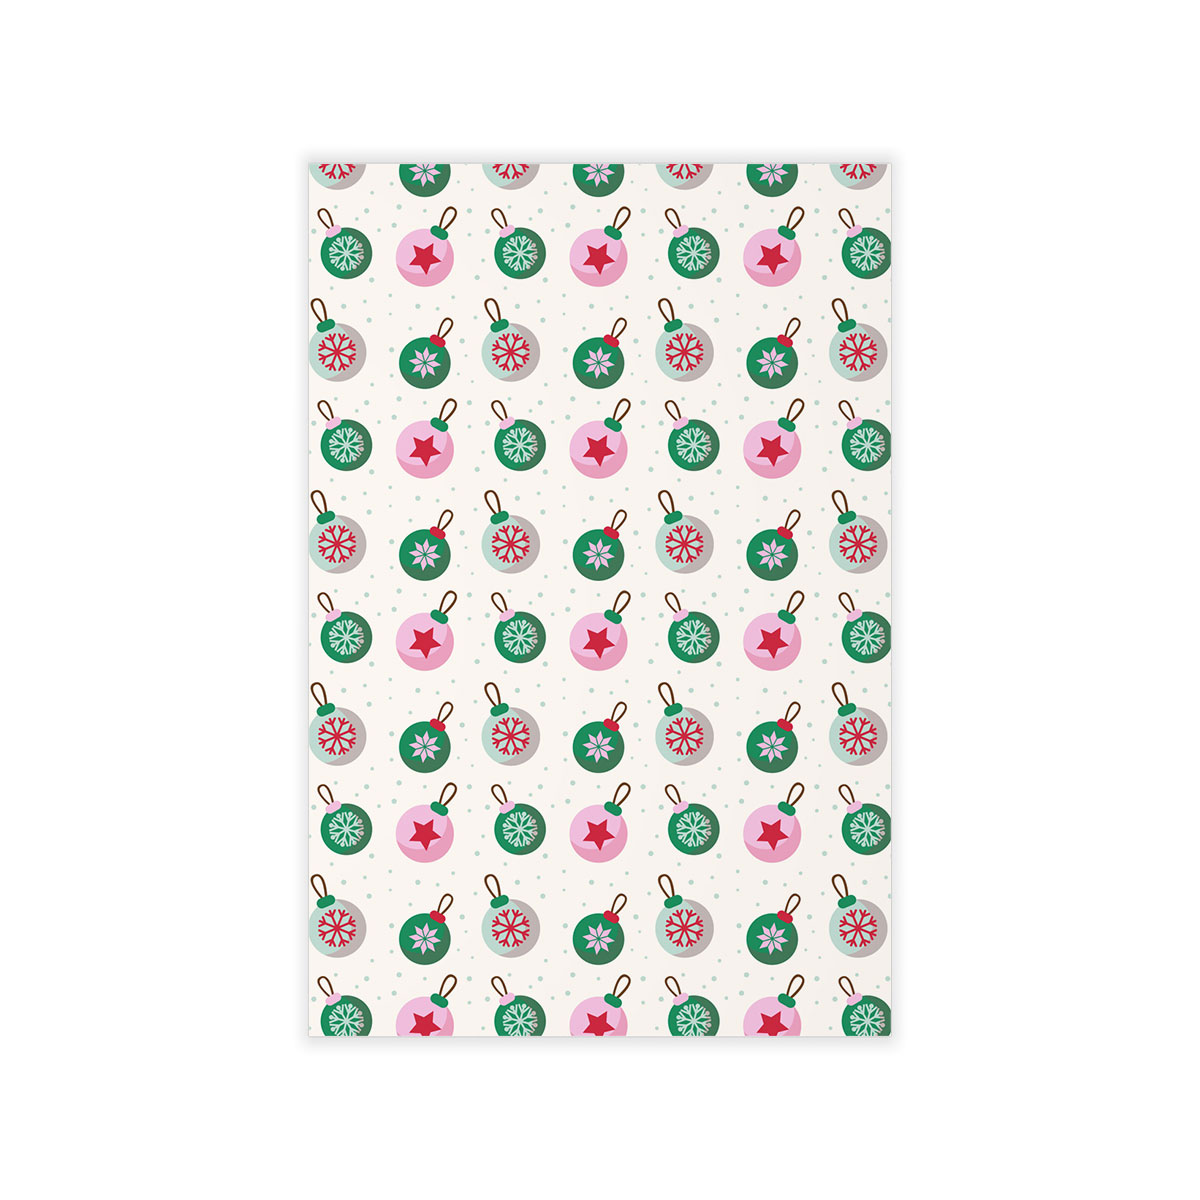 Green Pink And White Christmas Ball Pattern Wall Decals